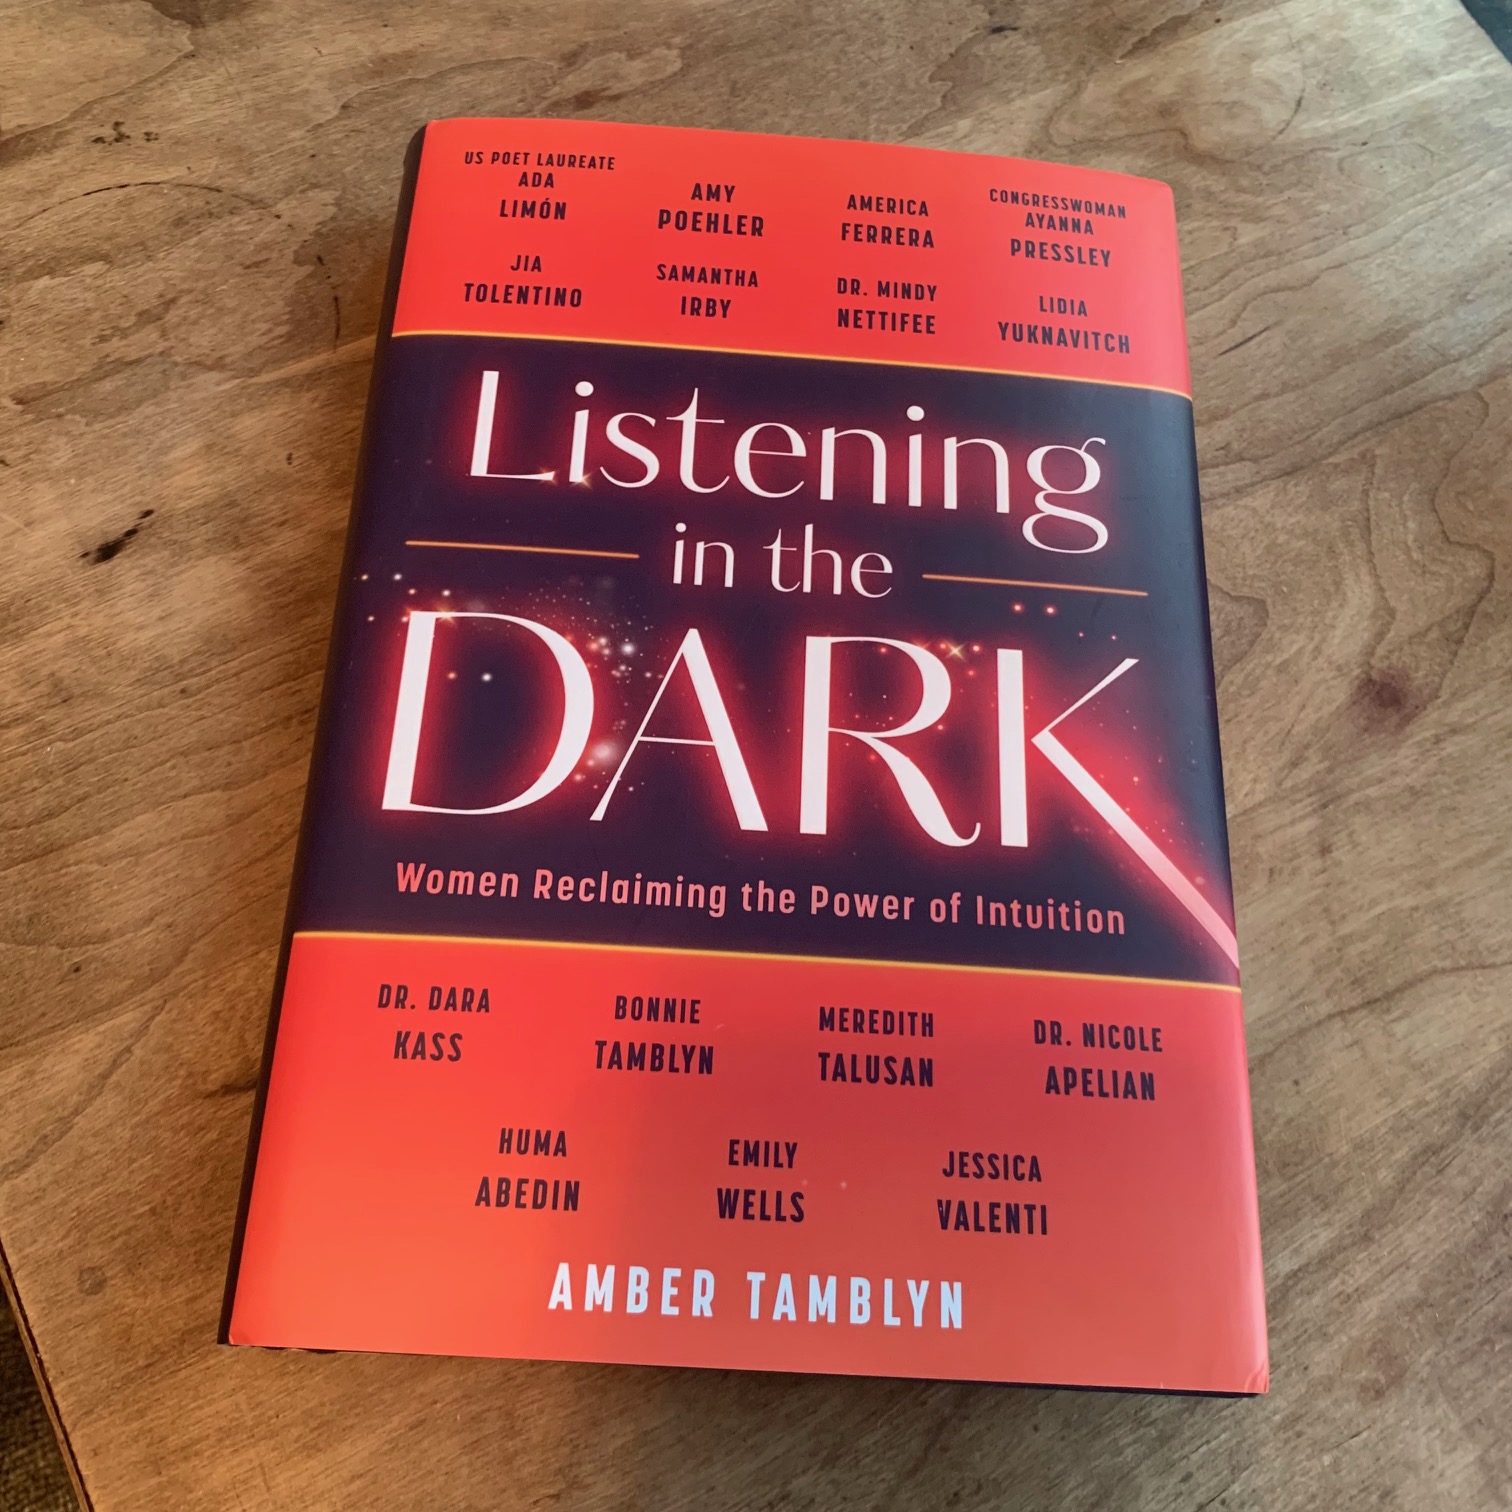 The red and black cover of Listening in the Dark